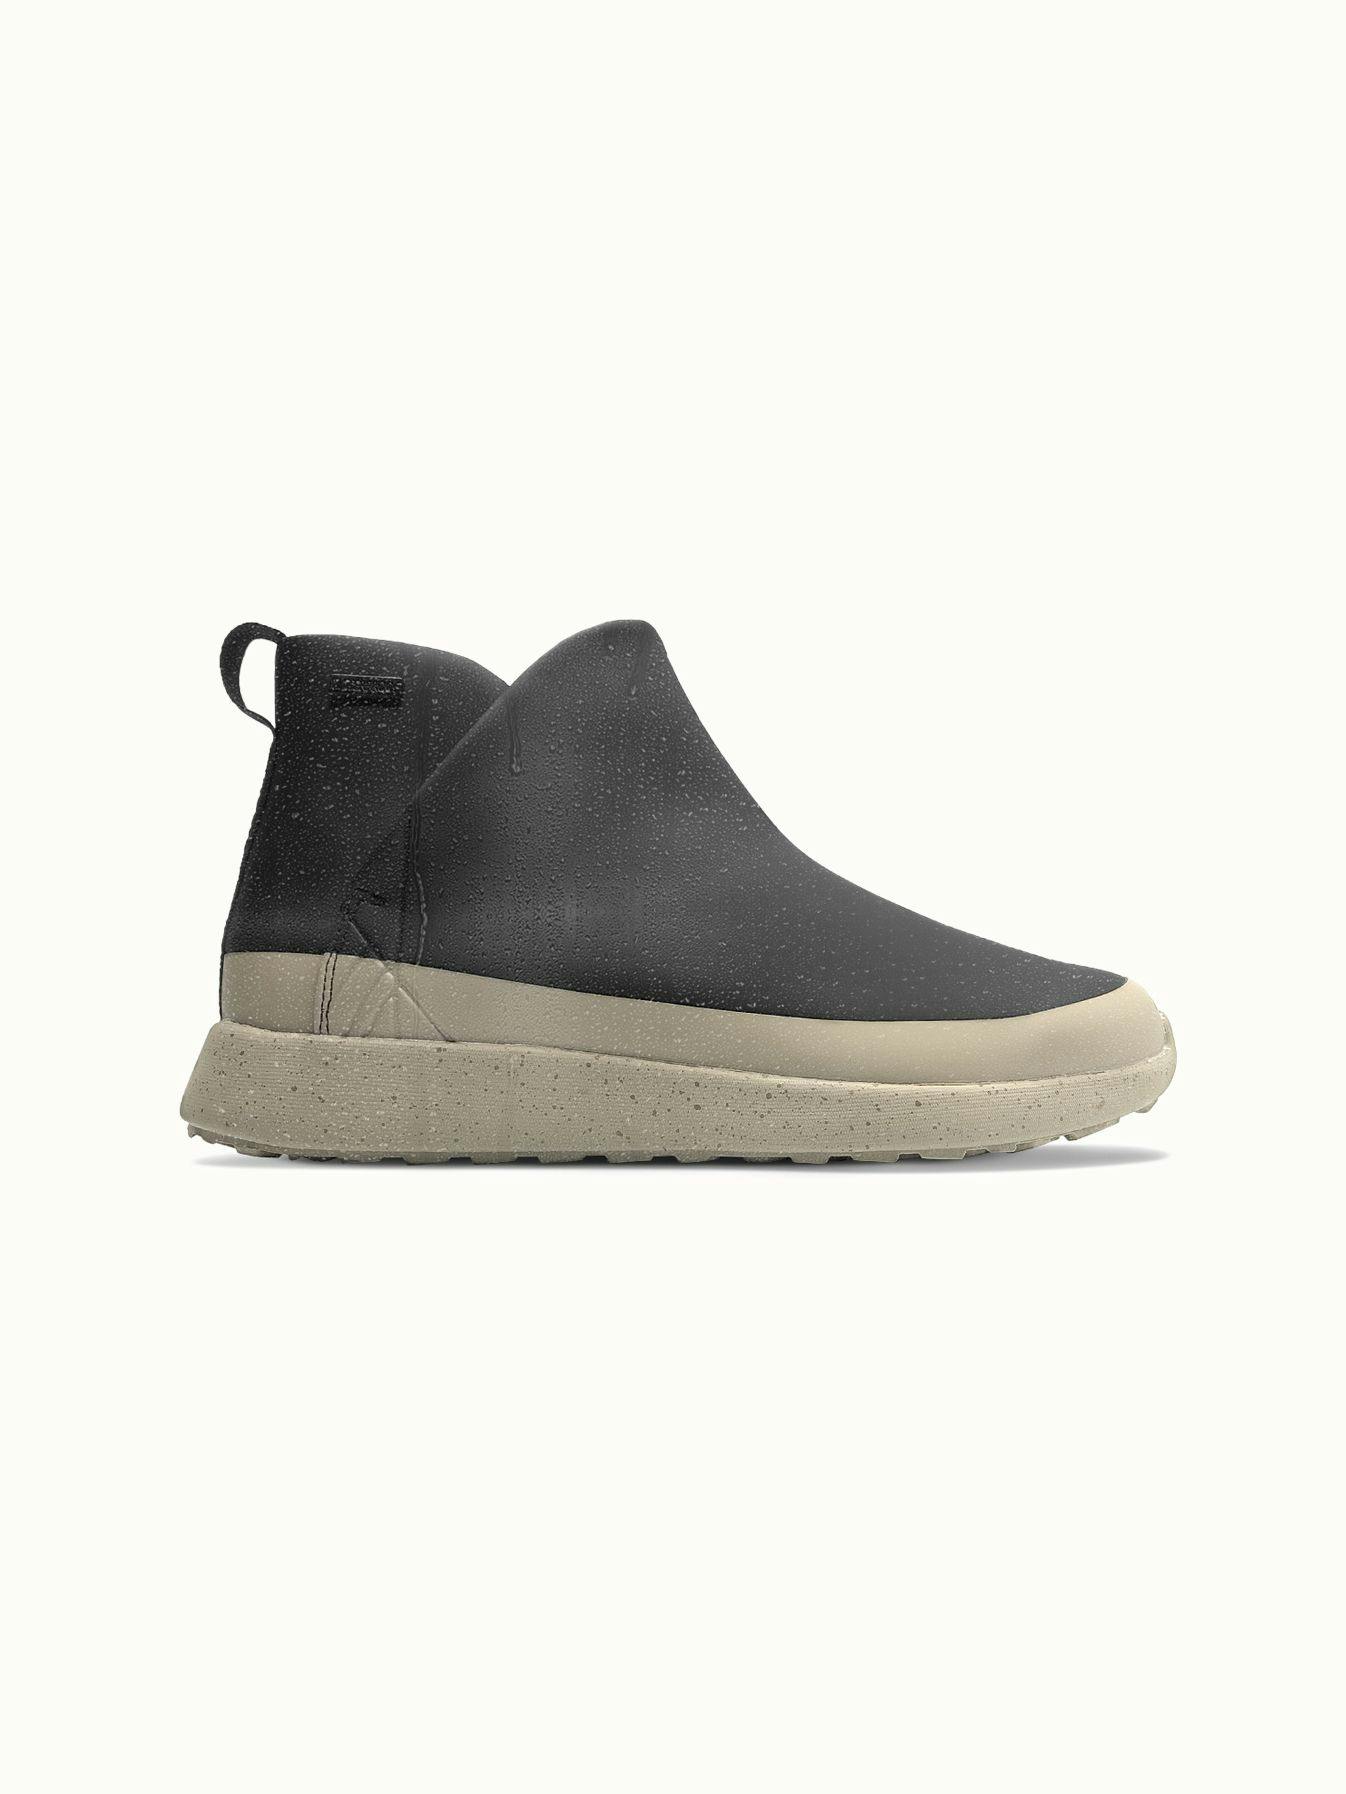 Elevate your daily wear with Røros Mud ankle boots, featuring waterproof PU, a classic sneaker sole, and a mudguard.